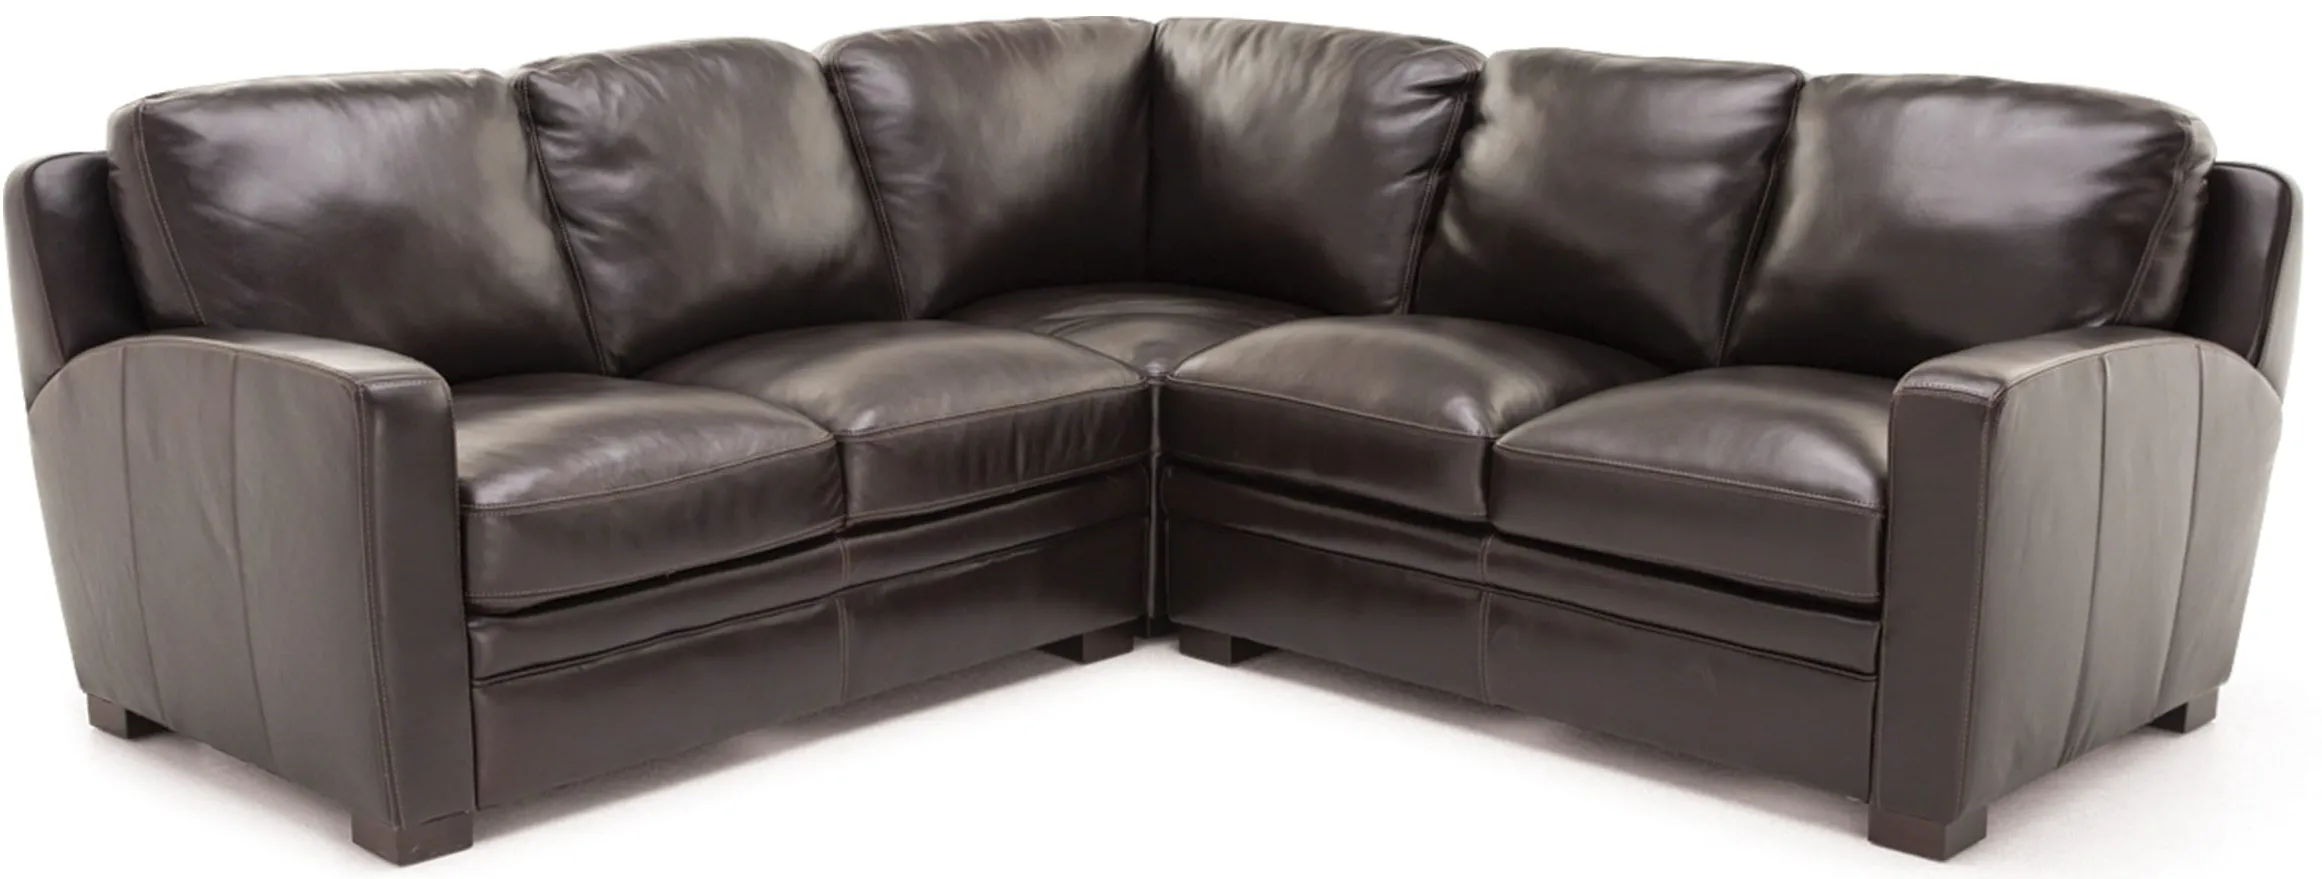 Carson 3-Pc. Leather Sectional 